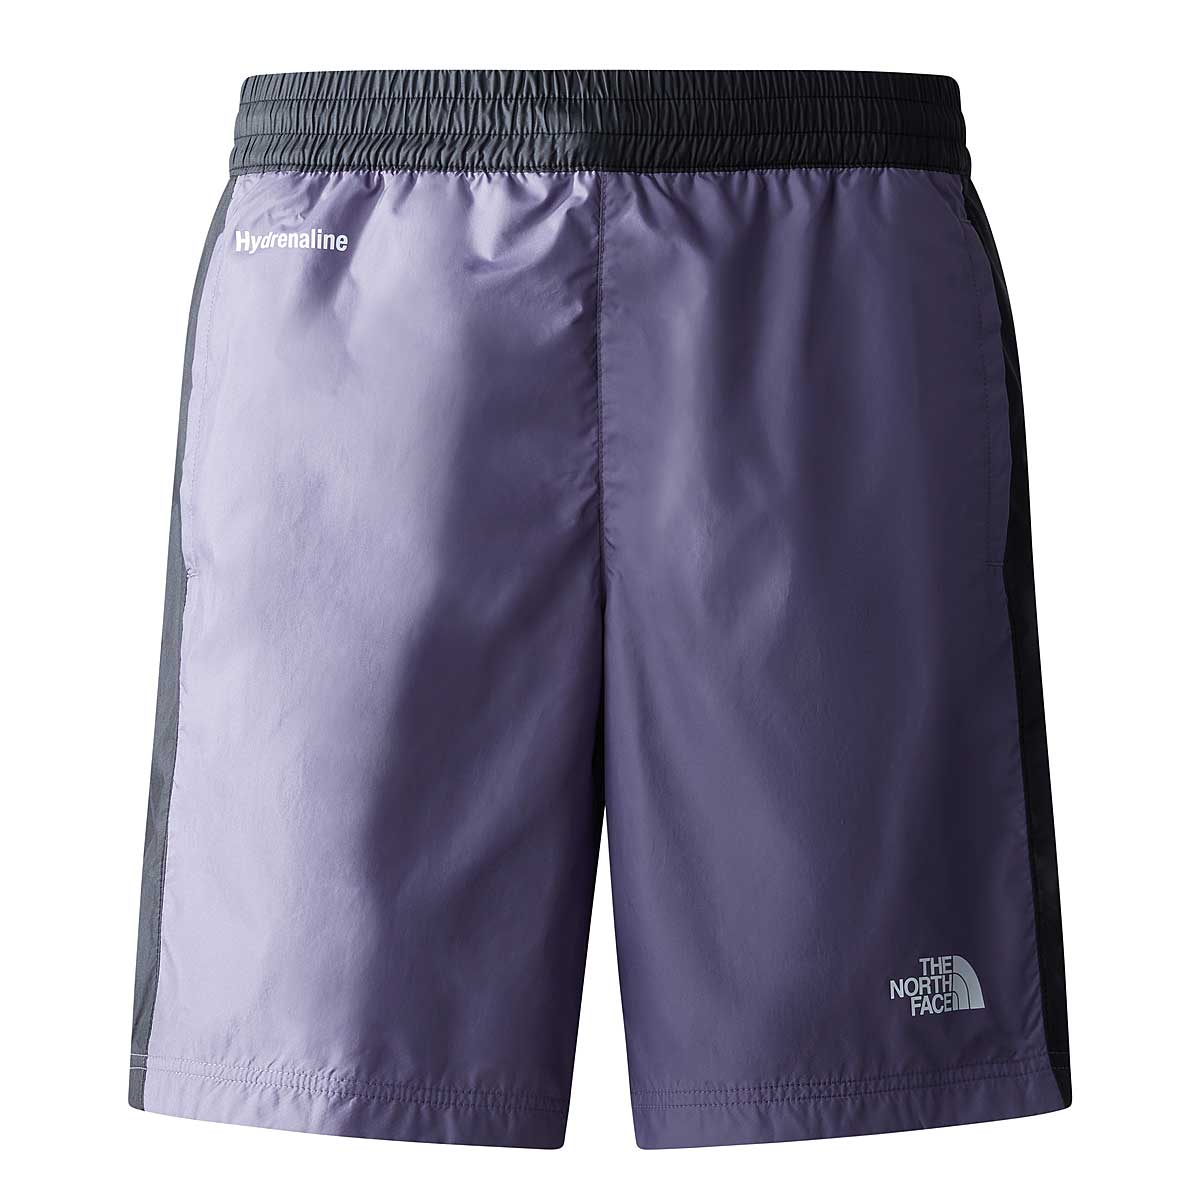 The North Face Hydrenaline Shorts 2000, Lunar Slate